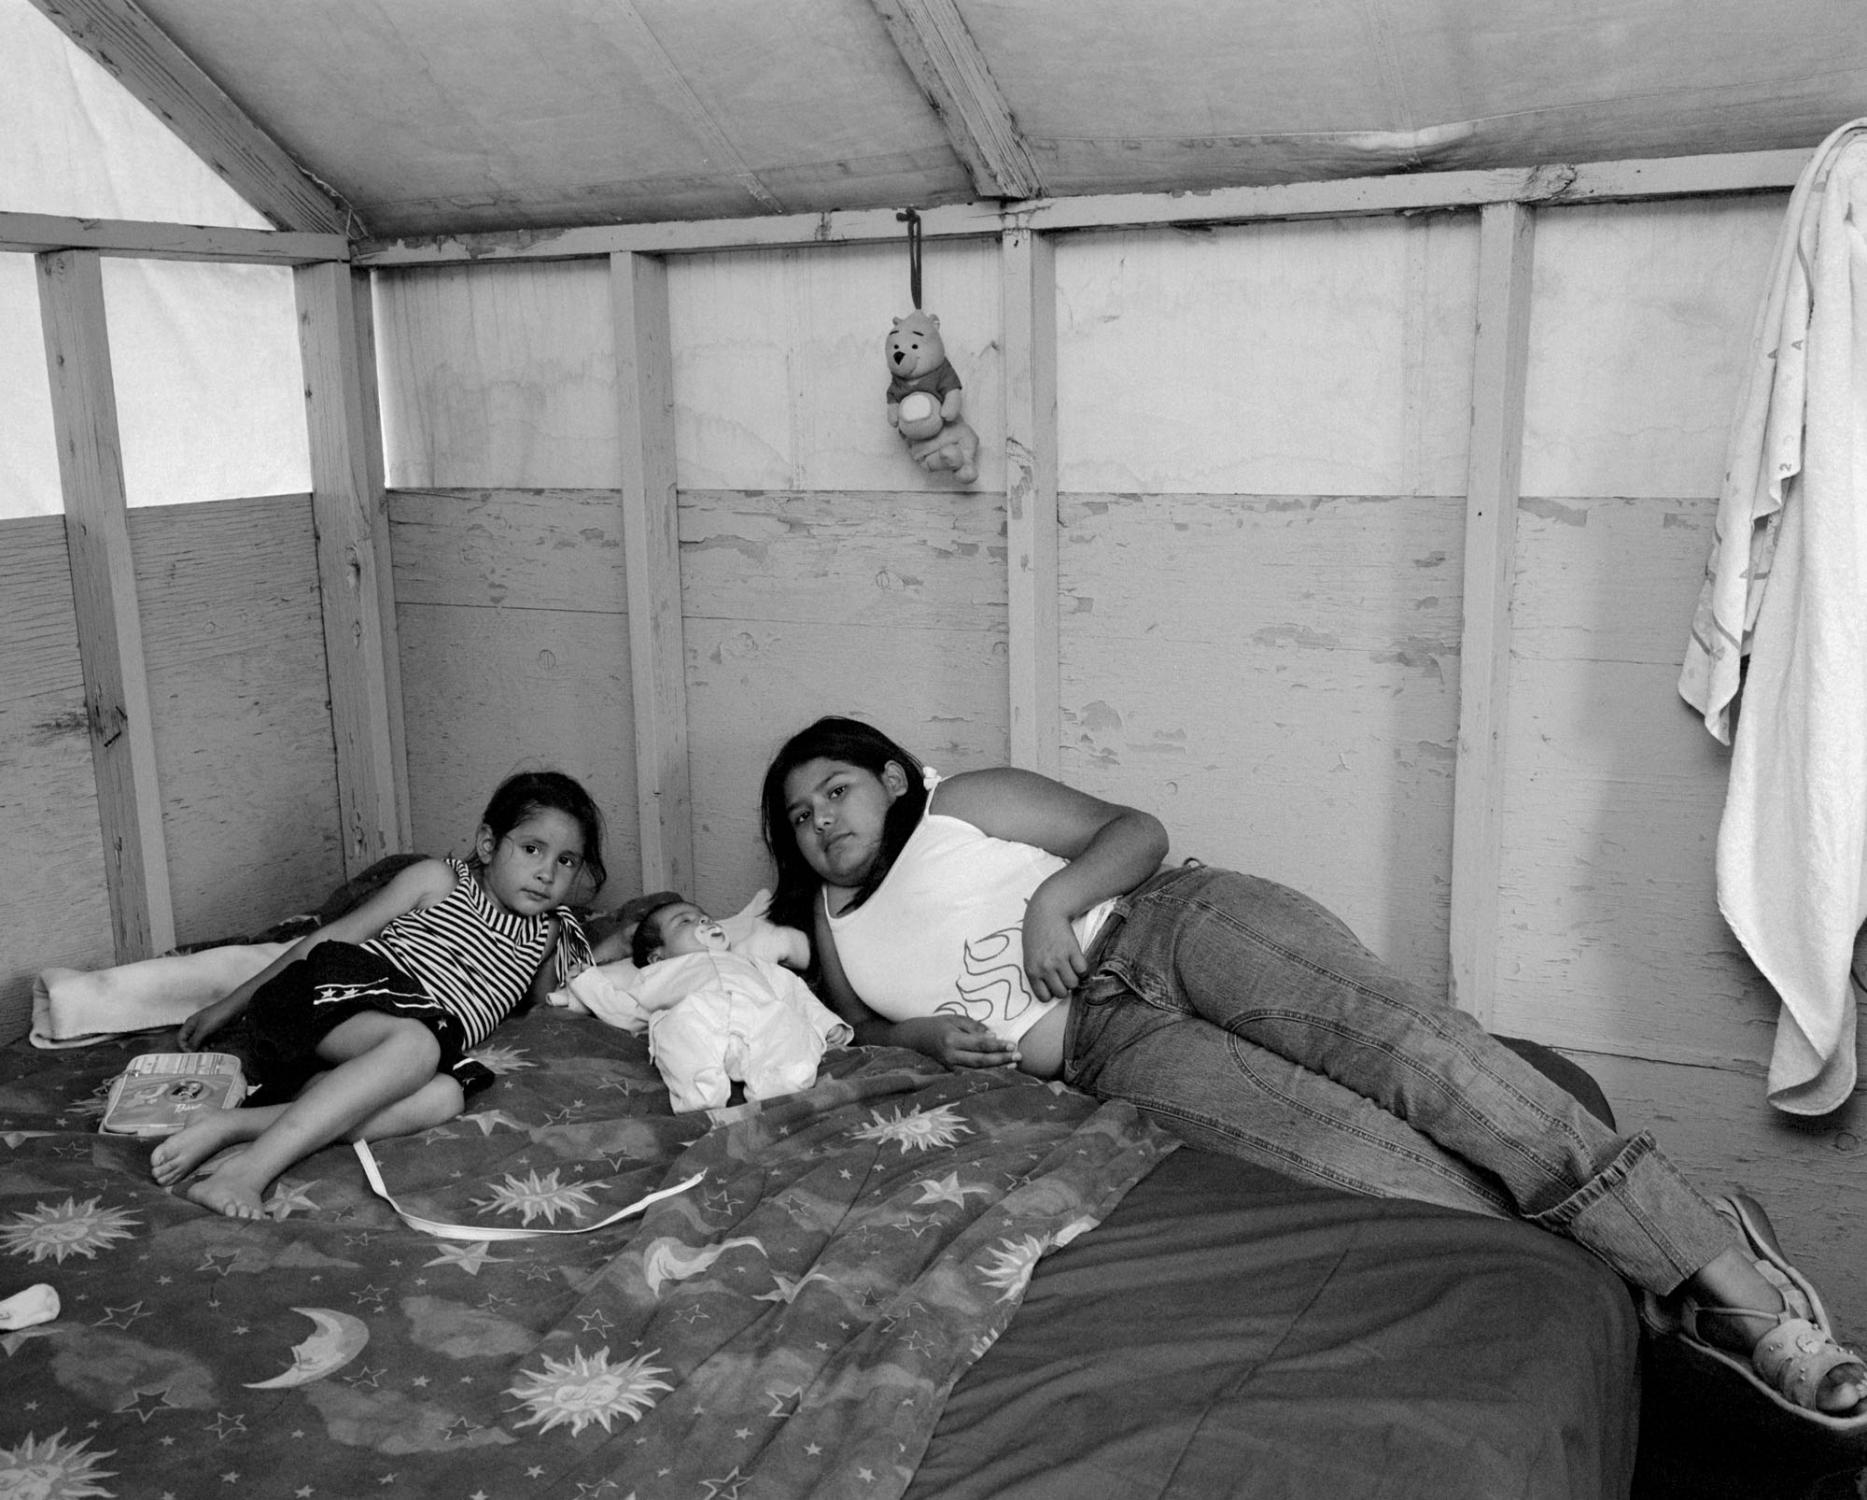 Estela (on the right), her younger sister, and their one month old cousin Amy in the cabin of their aunt in a migrant farmworker camp at a cherry farm. Estela&rsquo;s family originates from Mexico, lives in California now, but annually follows the harvest from the Pacific southwest to the northwest, picking cherries, apples and pears. The children were born in the United States and are American citizens. The Dalles, Oregon, USA. July 2005. From the photo story The Farmworkers&#39; Children. 